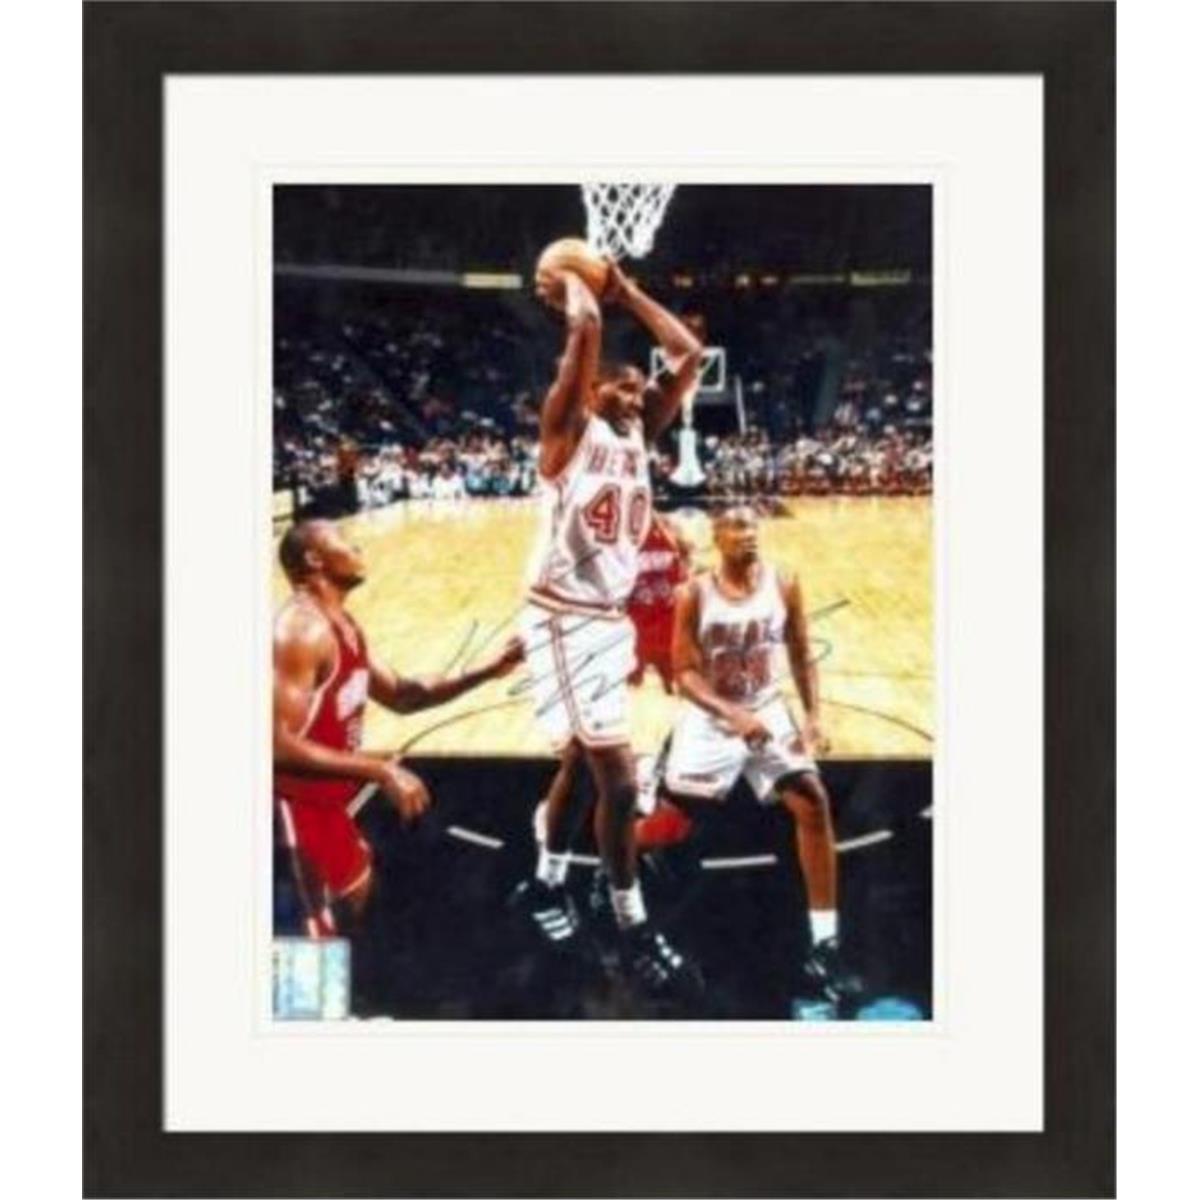 Picture of Autograph Warehouse 409785 8 x 10 in. Kurt Thomas Autographed Matted & Framed Photo - Miami Heat